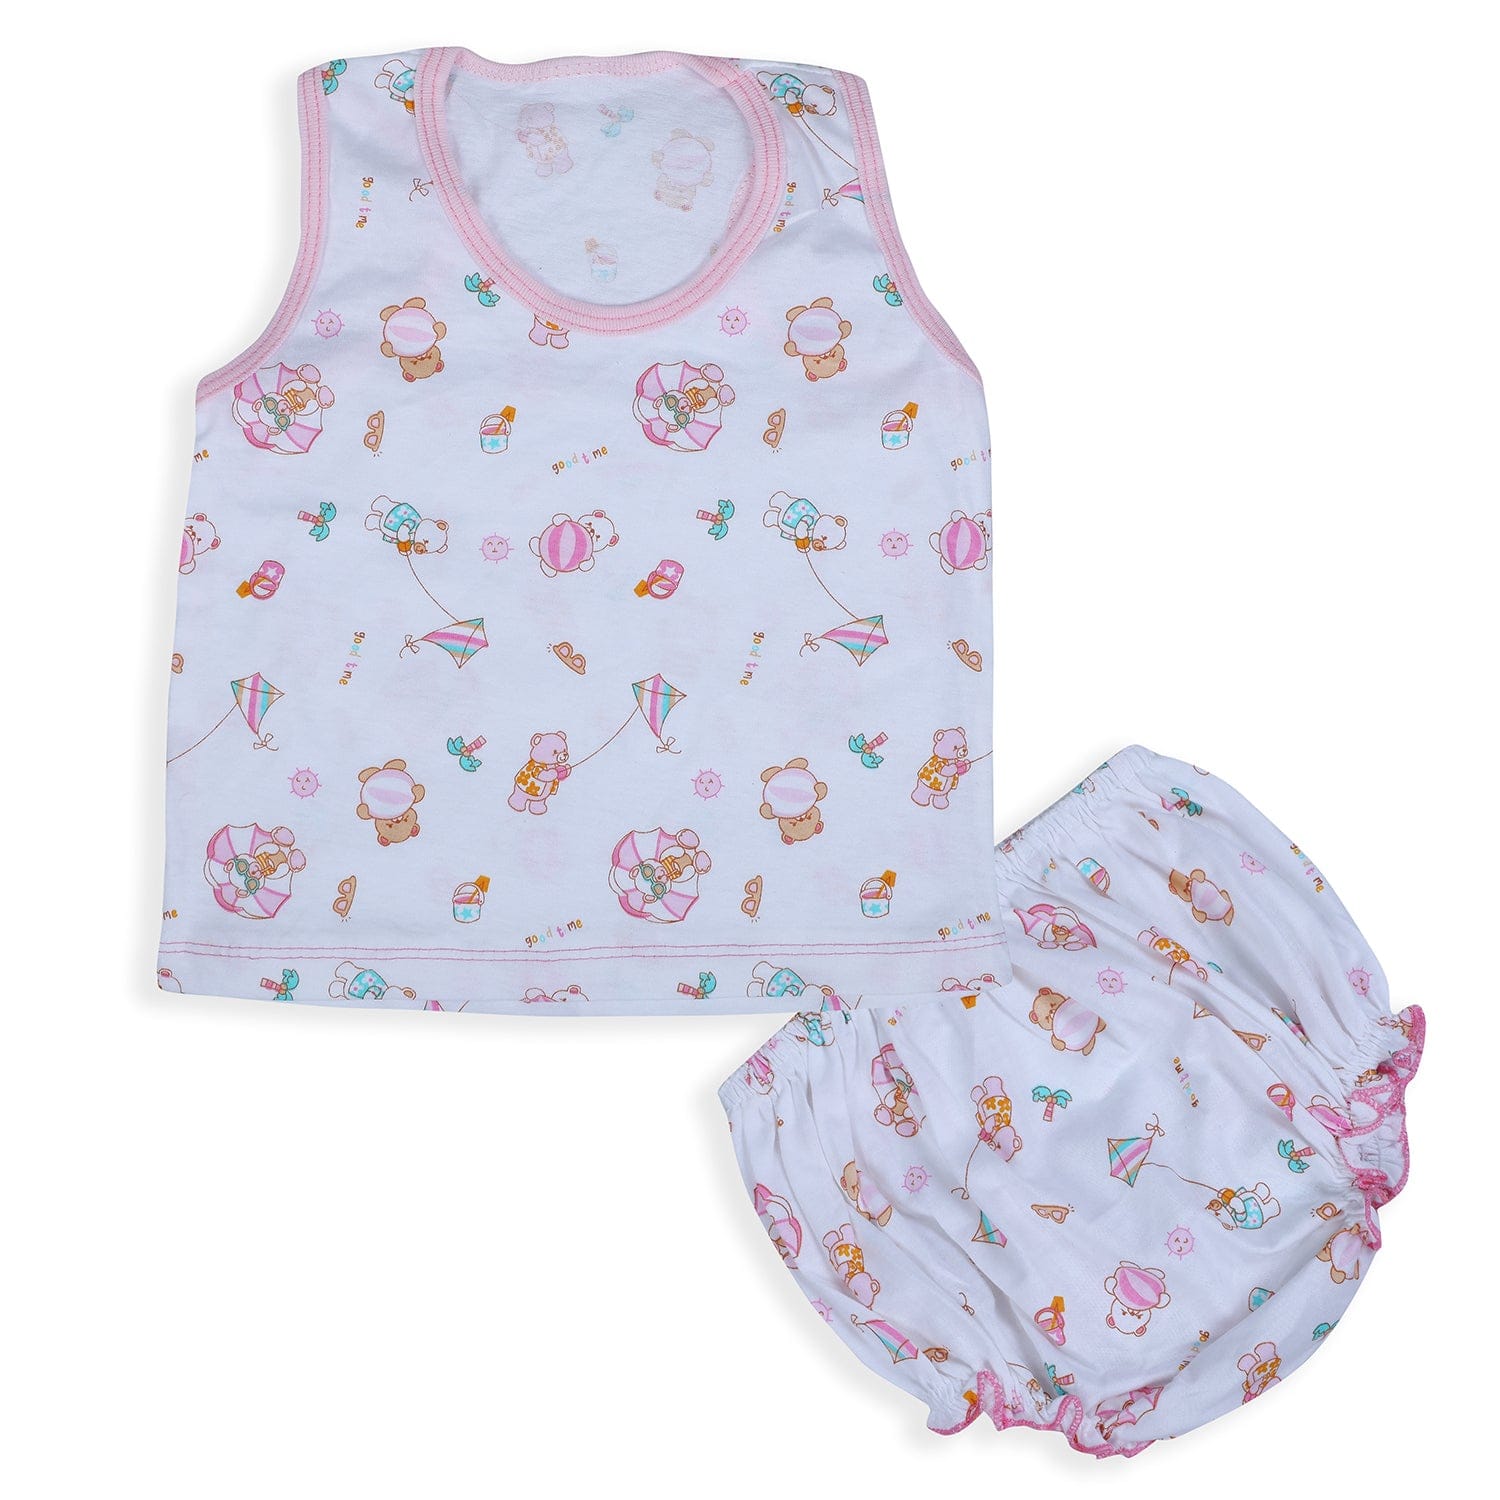 Baby Moo Kite Flying Bear Pure Cotton 2 Sleeveless Vest With 2 Matching Bottom - Pink & Green - Baby Moo